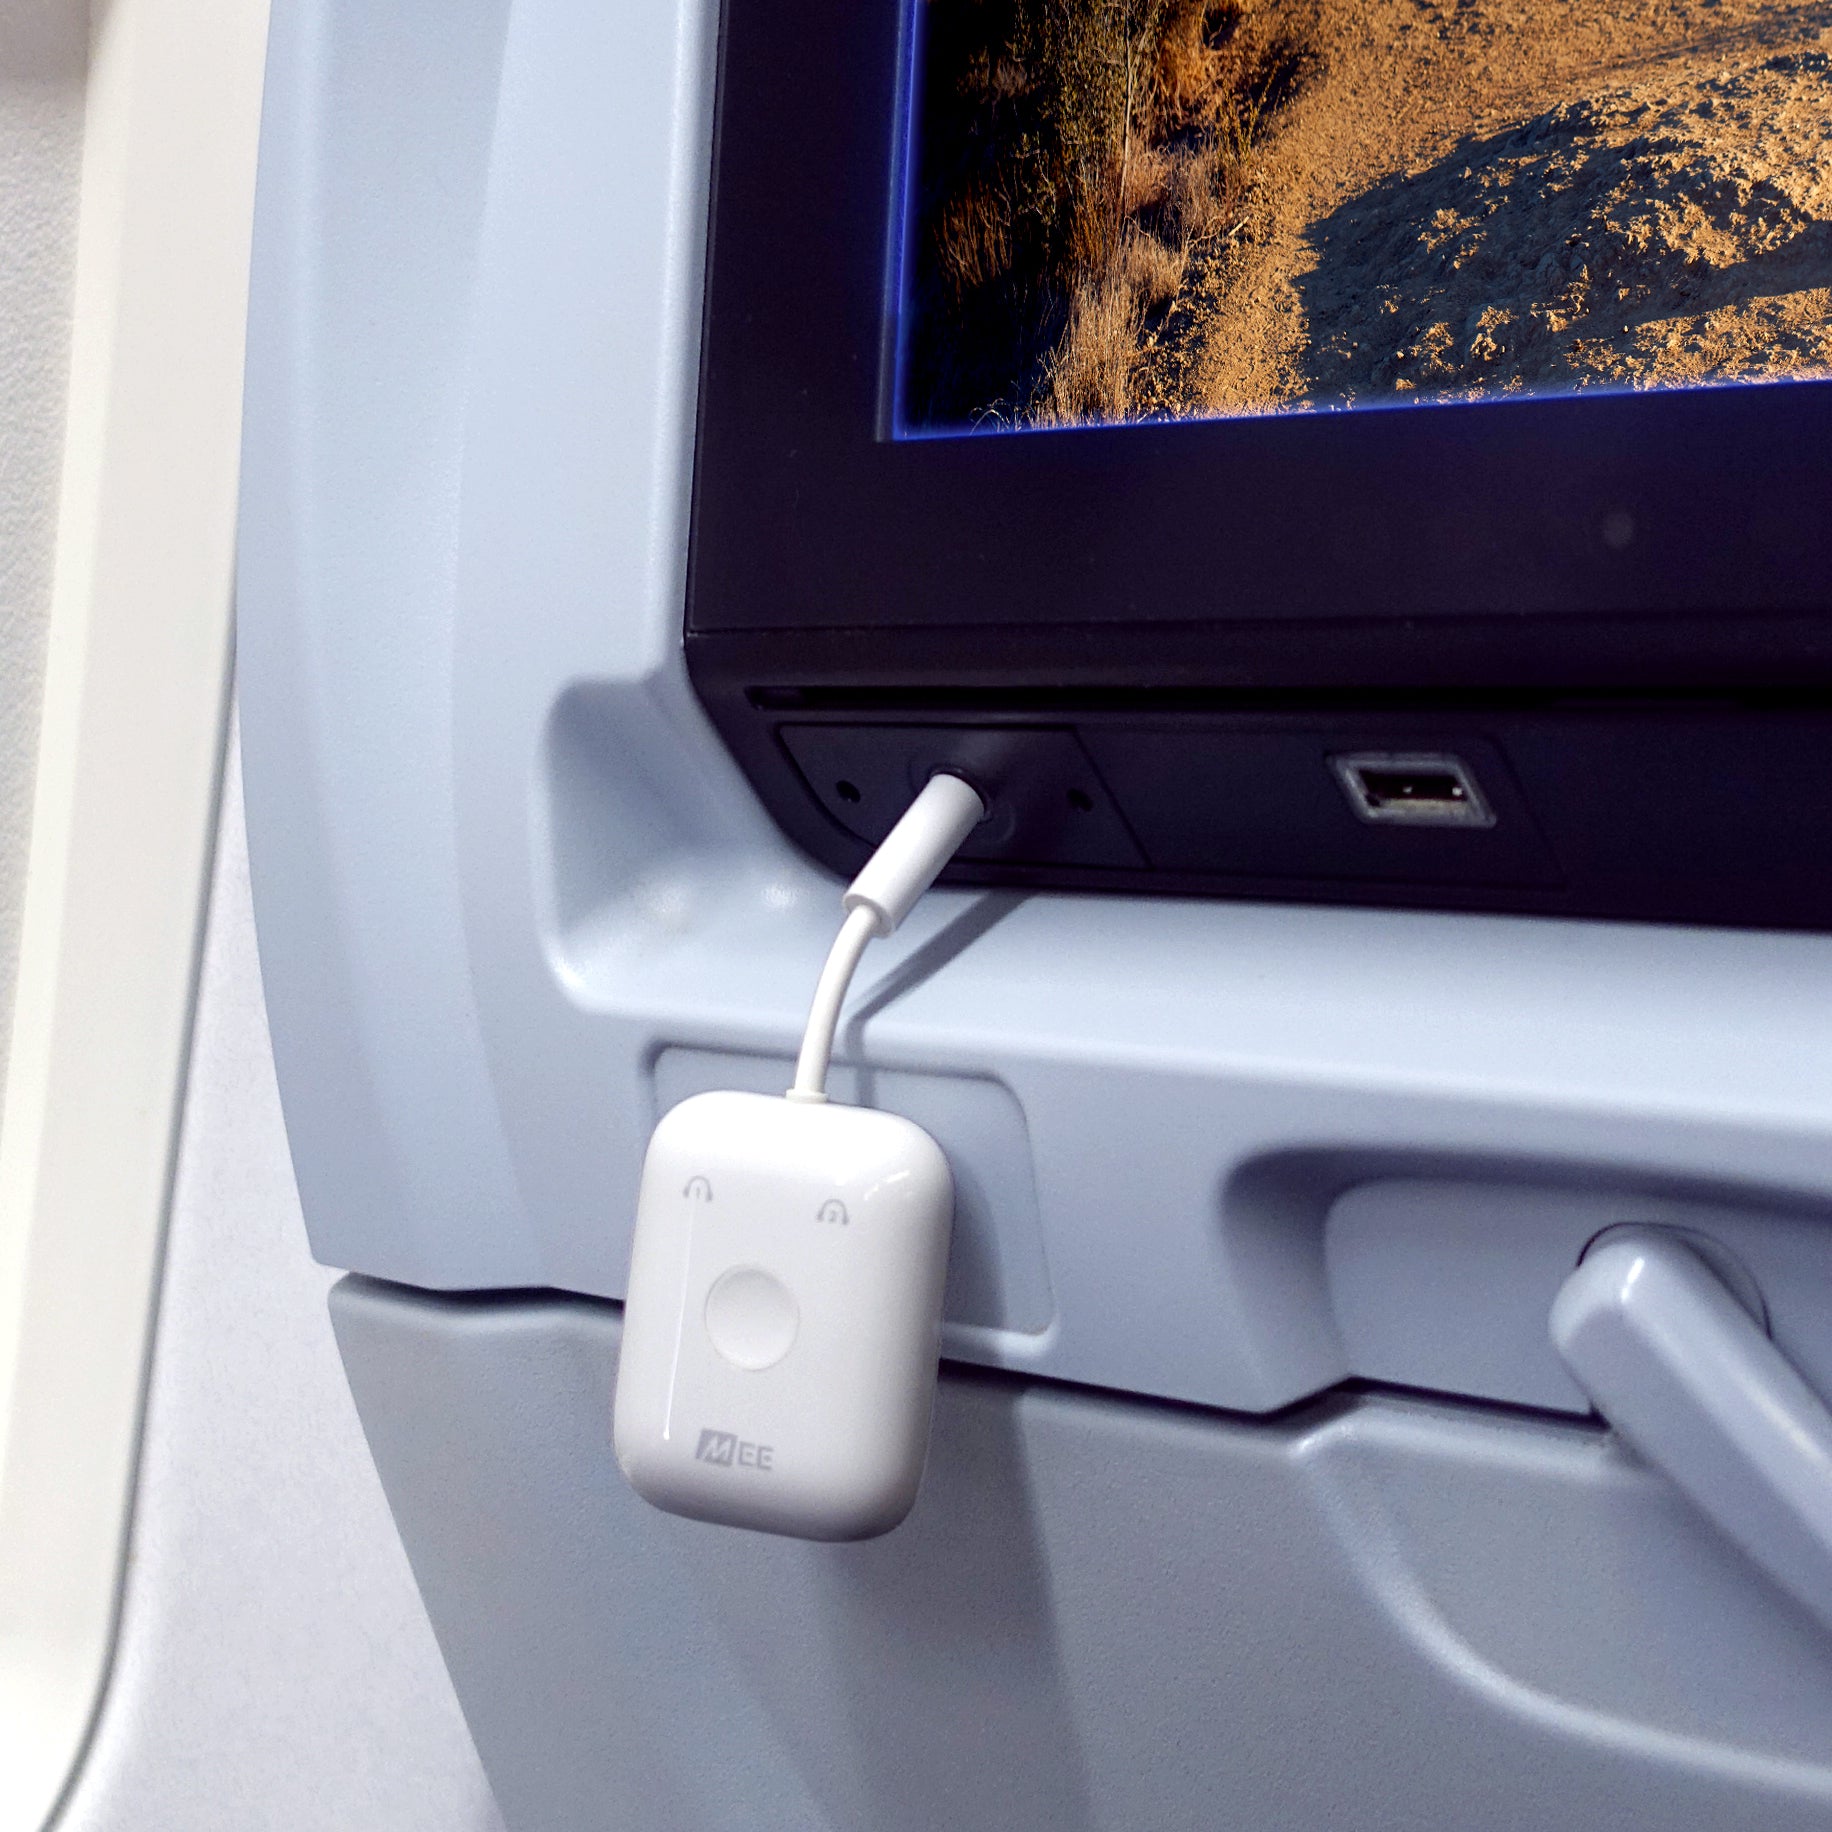 A white portable device charger plugged into an airplane seat's usb port, charging a connected gadget. the screen above displays a view of earthâ€™s surface from above.